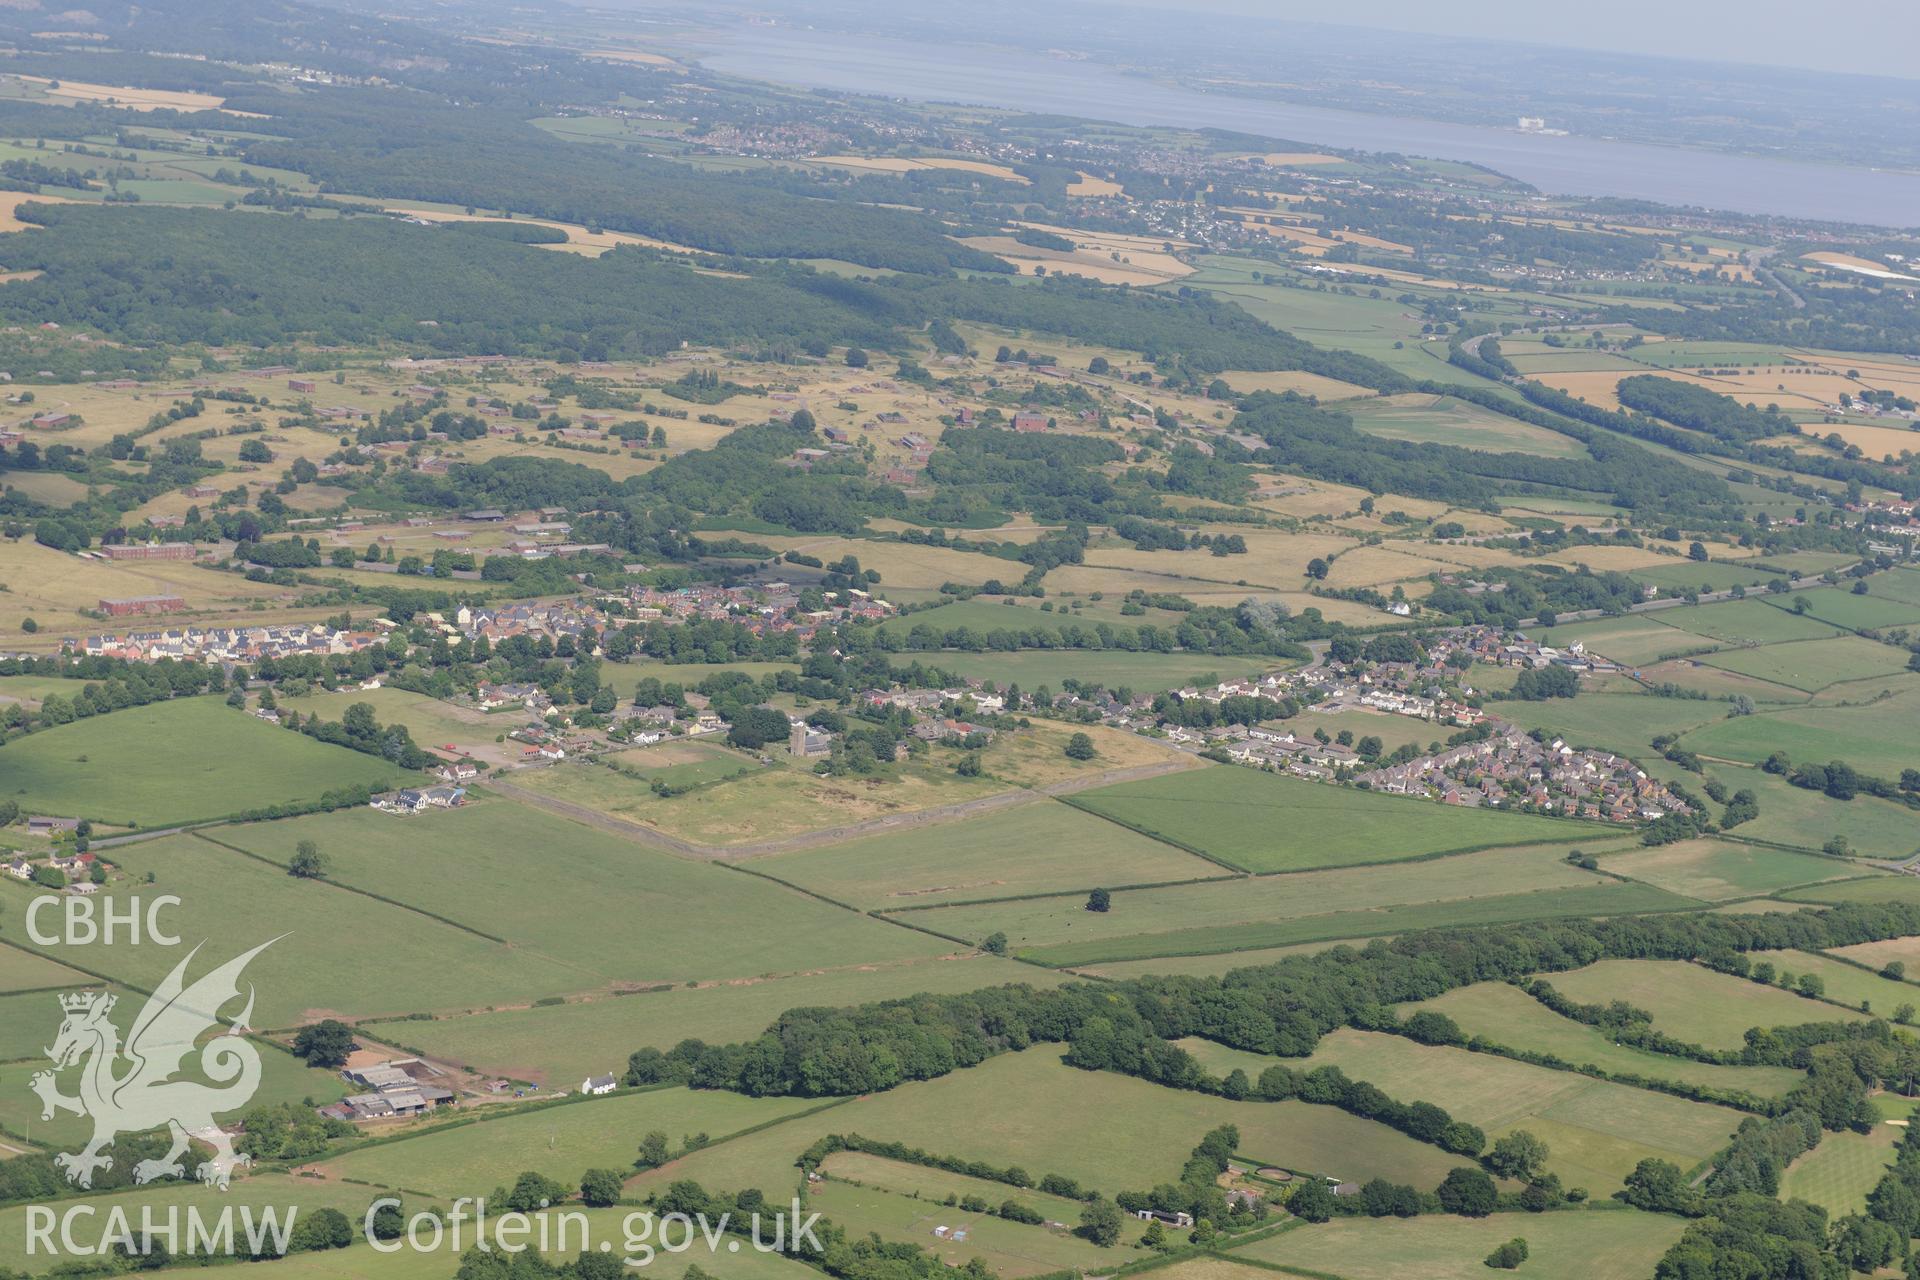 St. Stephen's church and Venta Silurum (Caerwent Roman City), Caerwent, south west of Chepstow. Oblique aerial photograph taken during the Royal Commission?s programme of archaeological aerial reconnaissance by Toby Driver on 1st August 2013.